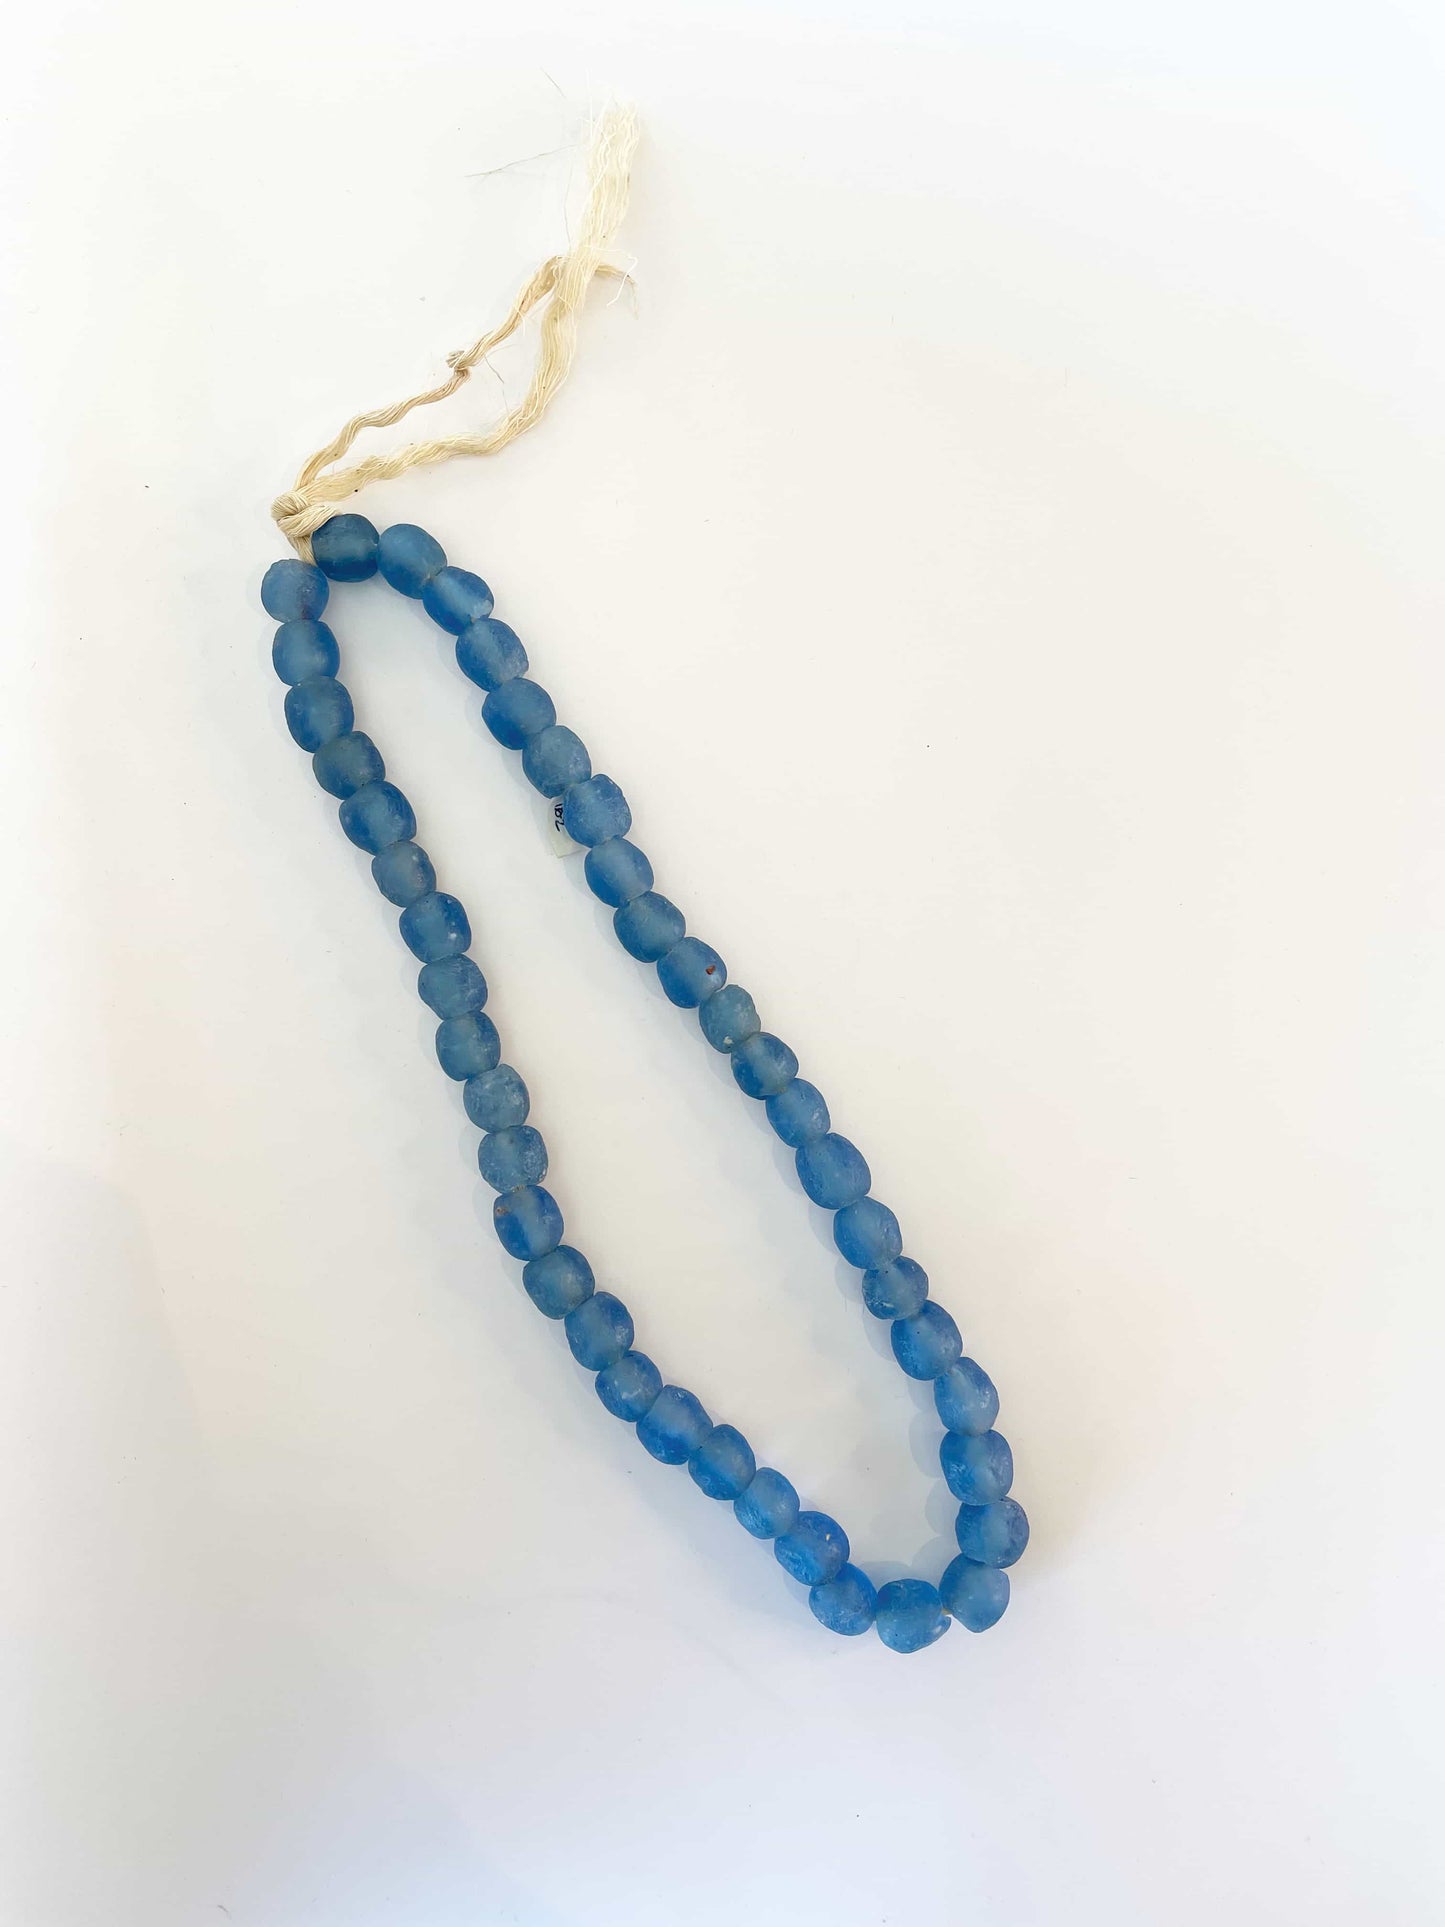 Recycled glass beads in ocean blue